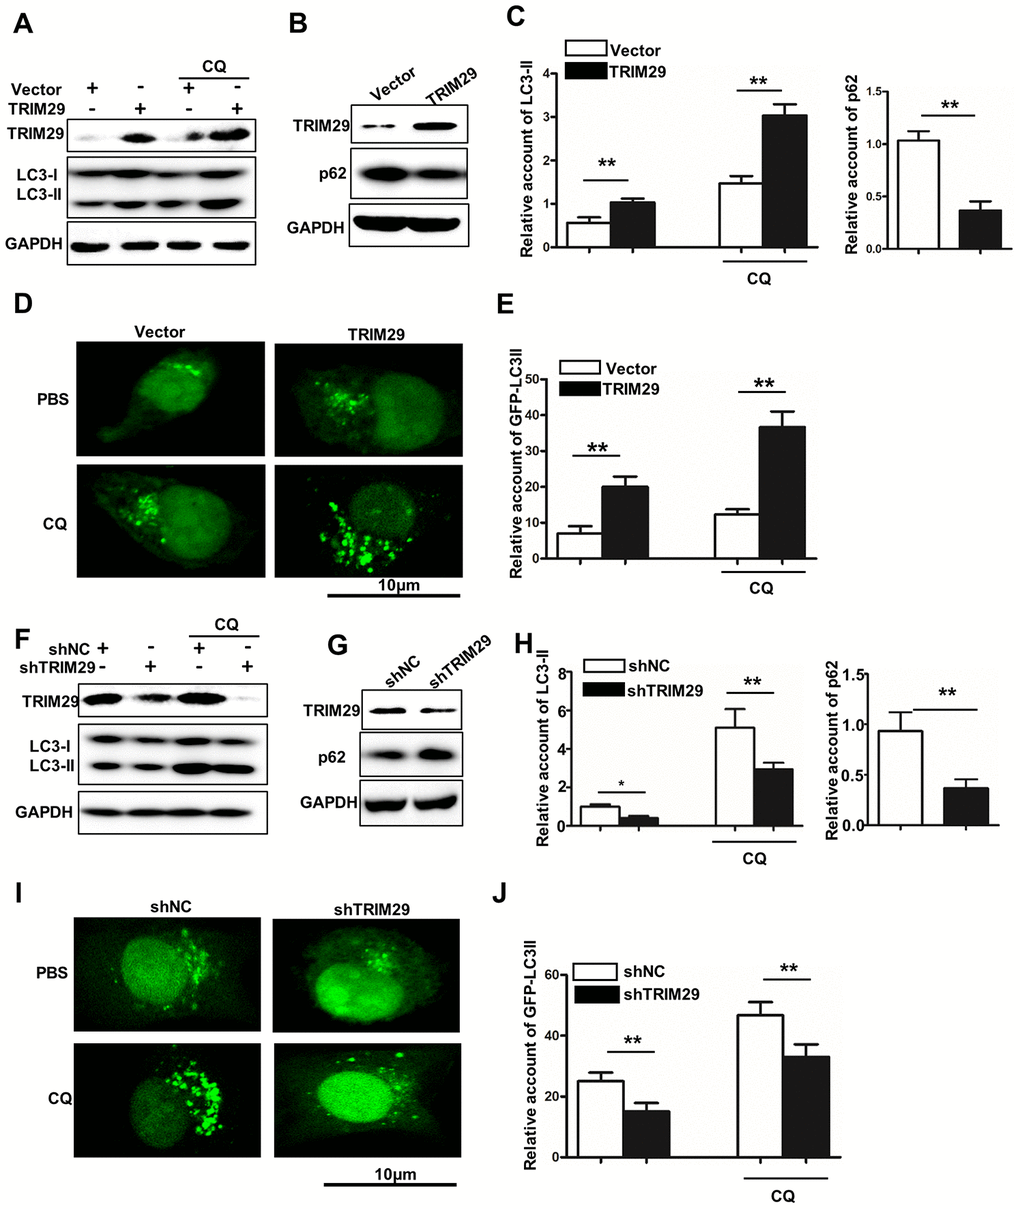 TRIM29 promotes autophagy in lung squamous cell carcinoma. (A) Western blot analysis of TRIM29, LC3-I, and LC3-II in TRIM29 over-expression treated HTB-182 cells with or without CQ treatment. (B) Western blot analysis of TRIM29 and p62 in TRIM29 over-expression treated HTB-182 cells. (C) The relative account of LC3-II and p62 in TRIM29 over-expression treated HTB-182 cells. (D) confocal analysis of GFP-LC3II expression in TRIM29 over-expression treated HTB-182 with PBS and CQ treatment. (E) The relative GFP-LC3II expression in TRIM29 over-expression treated HTB-182 with or without CQ treatment. (F) Western blot analysis of TRIM29, LC3-I, and LC3-II in TRIM29 knockdown treated NCI-H1915 cells with or without CQ treatment. (G) Western blot analysis of TRIM29 and p62 in TRIM29 knockdown treated NCI-H1915 cells. (H) The relative account of LC3-II and p62 in TRIM29 knockdown treated NCI-H1915 cells. (I) confocal analysis of GFP-LC3II expression in TRIM29 knockdown treated NCI-H1915 cells with PBS and CQ treatment. (J) The relative GFP-LC3II expression in TRIM29 knockdown treated NCI-H1915 cells with or without CQ treatment. **P